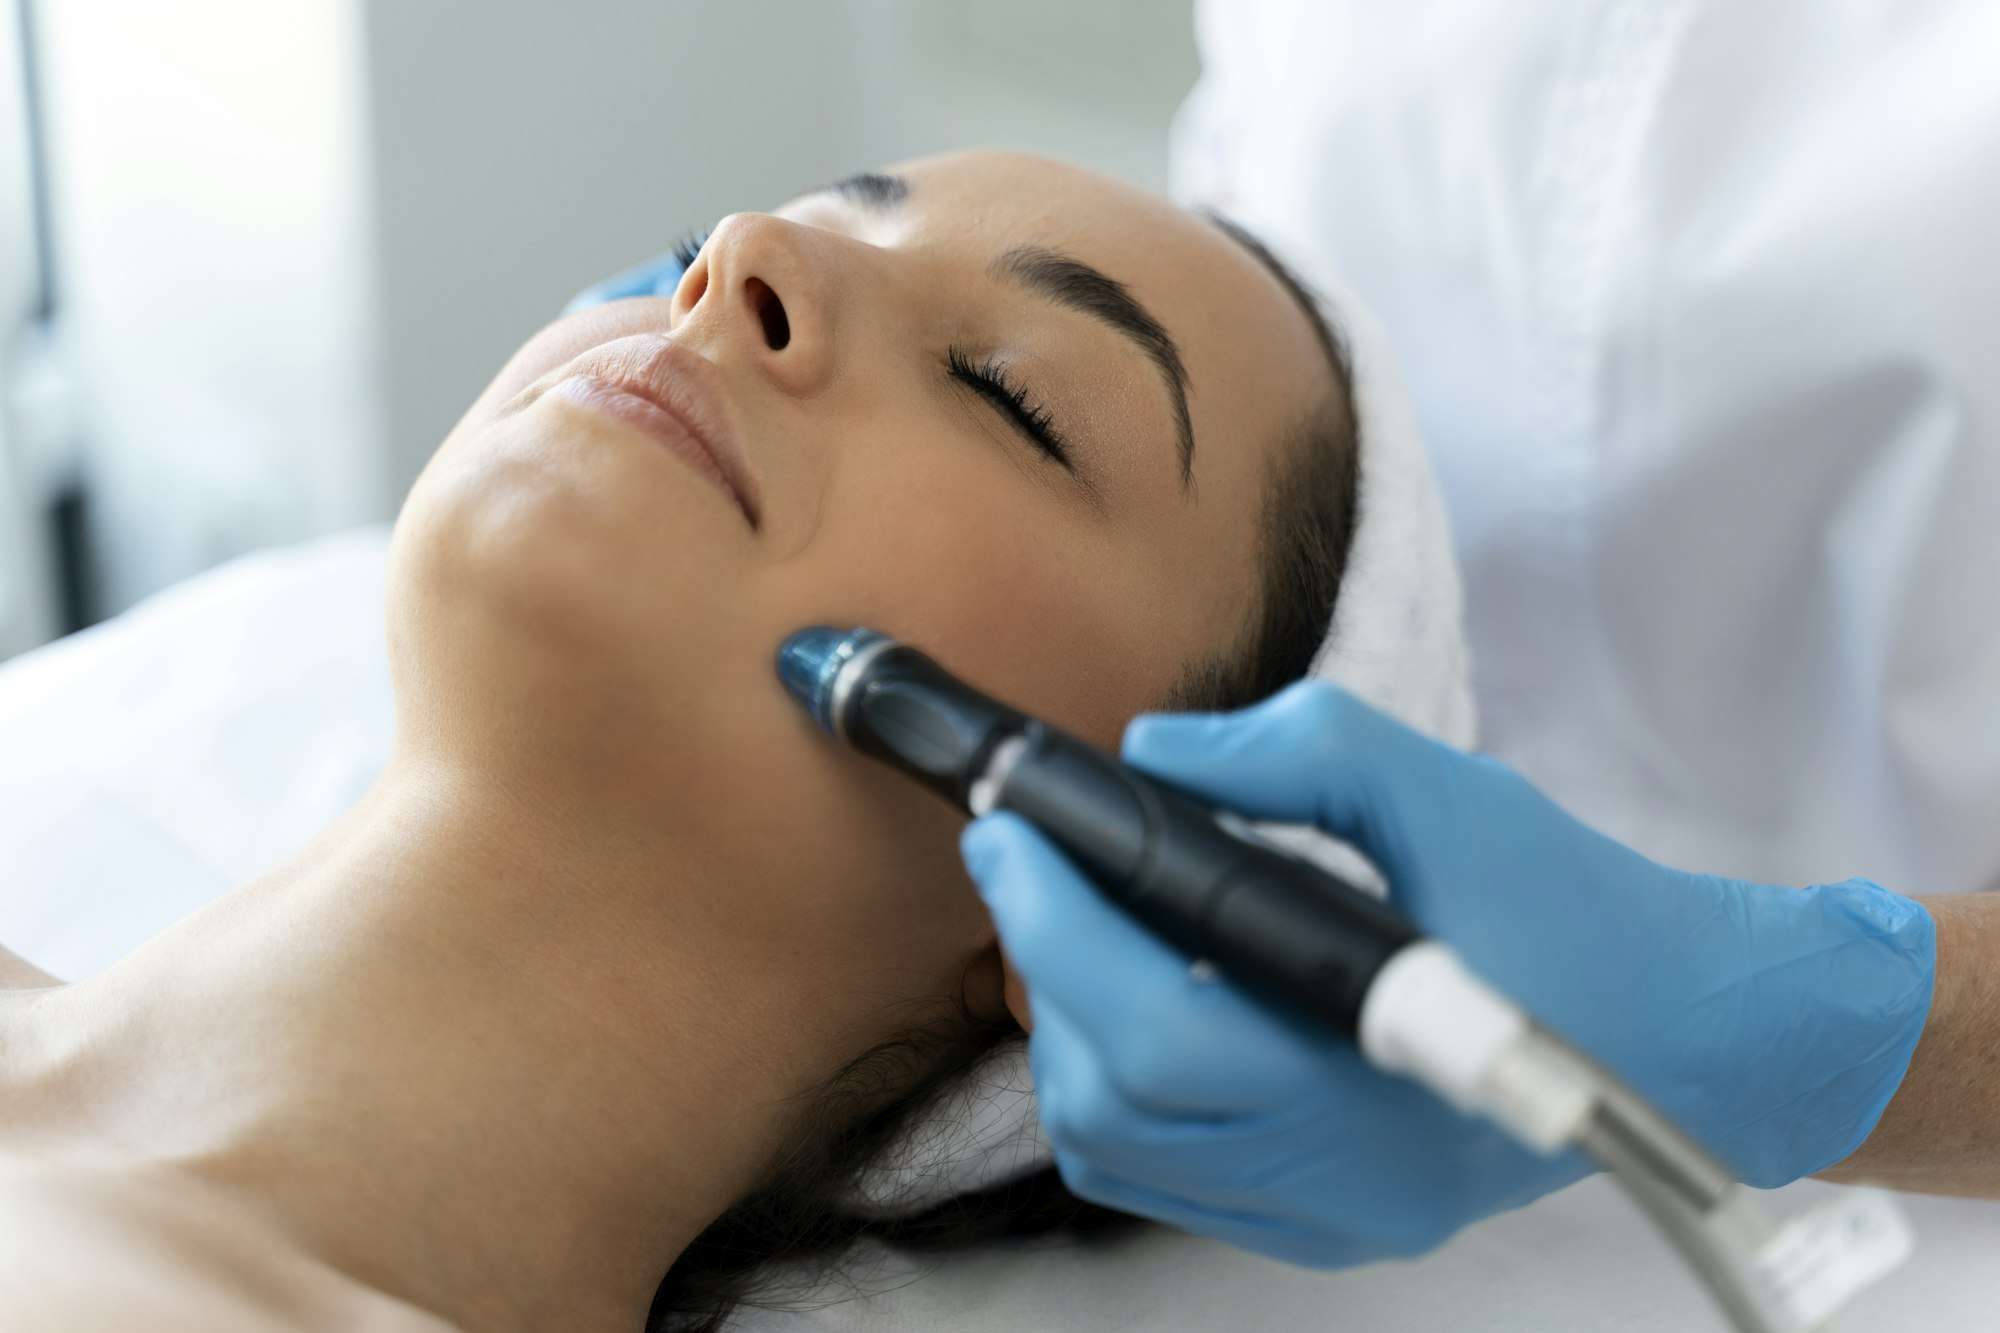 Close-up of woman getting facial hydro microdermabrasion peeling treatment